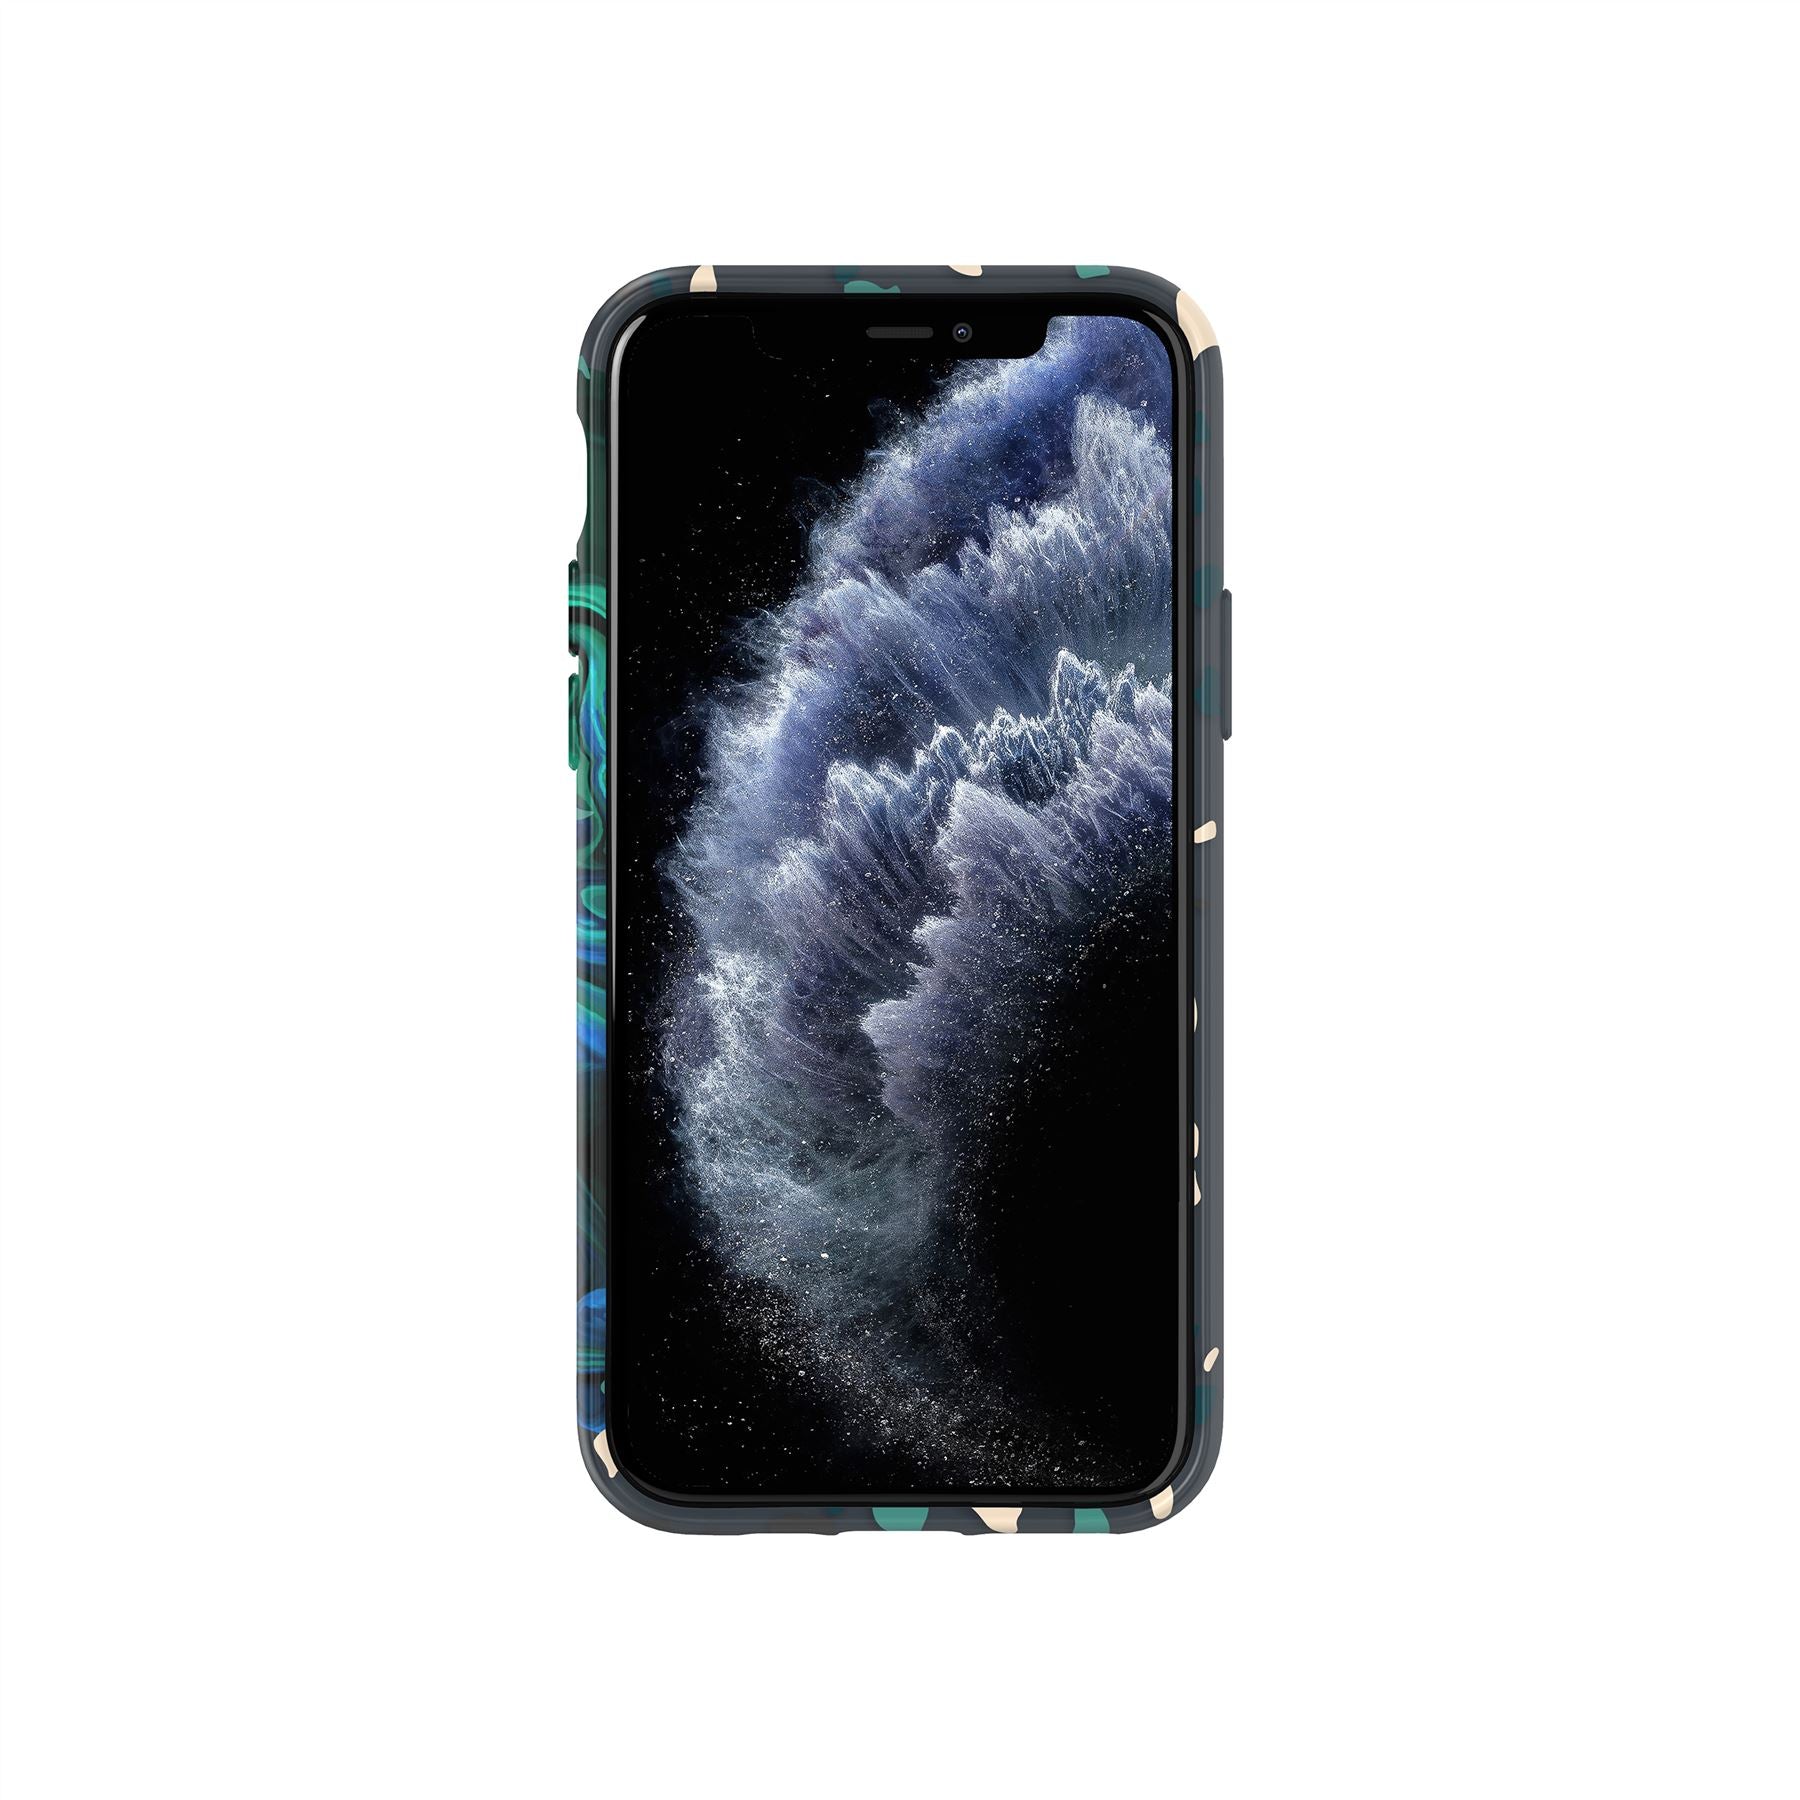 Remix in Motion - Apple iPhone 11 Pro Case - Slate